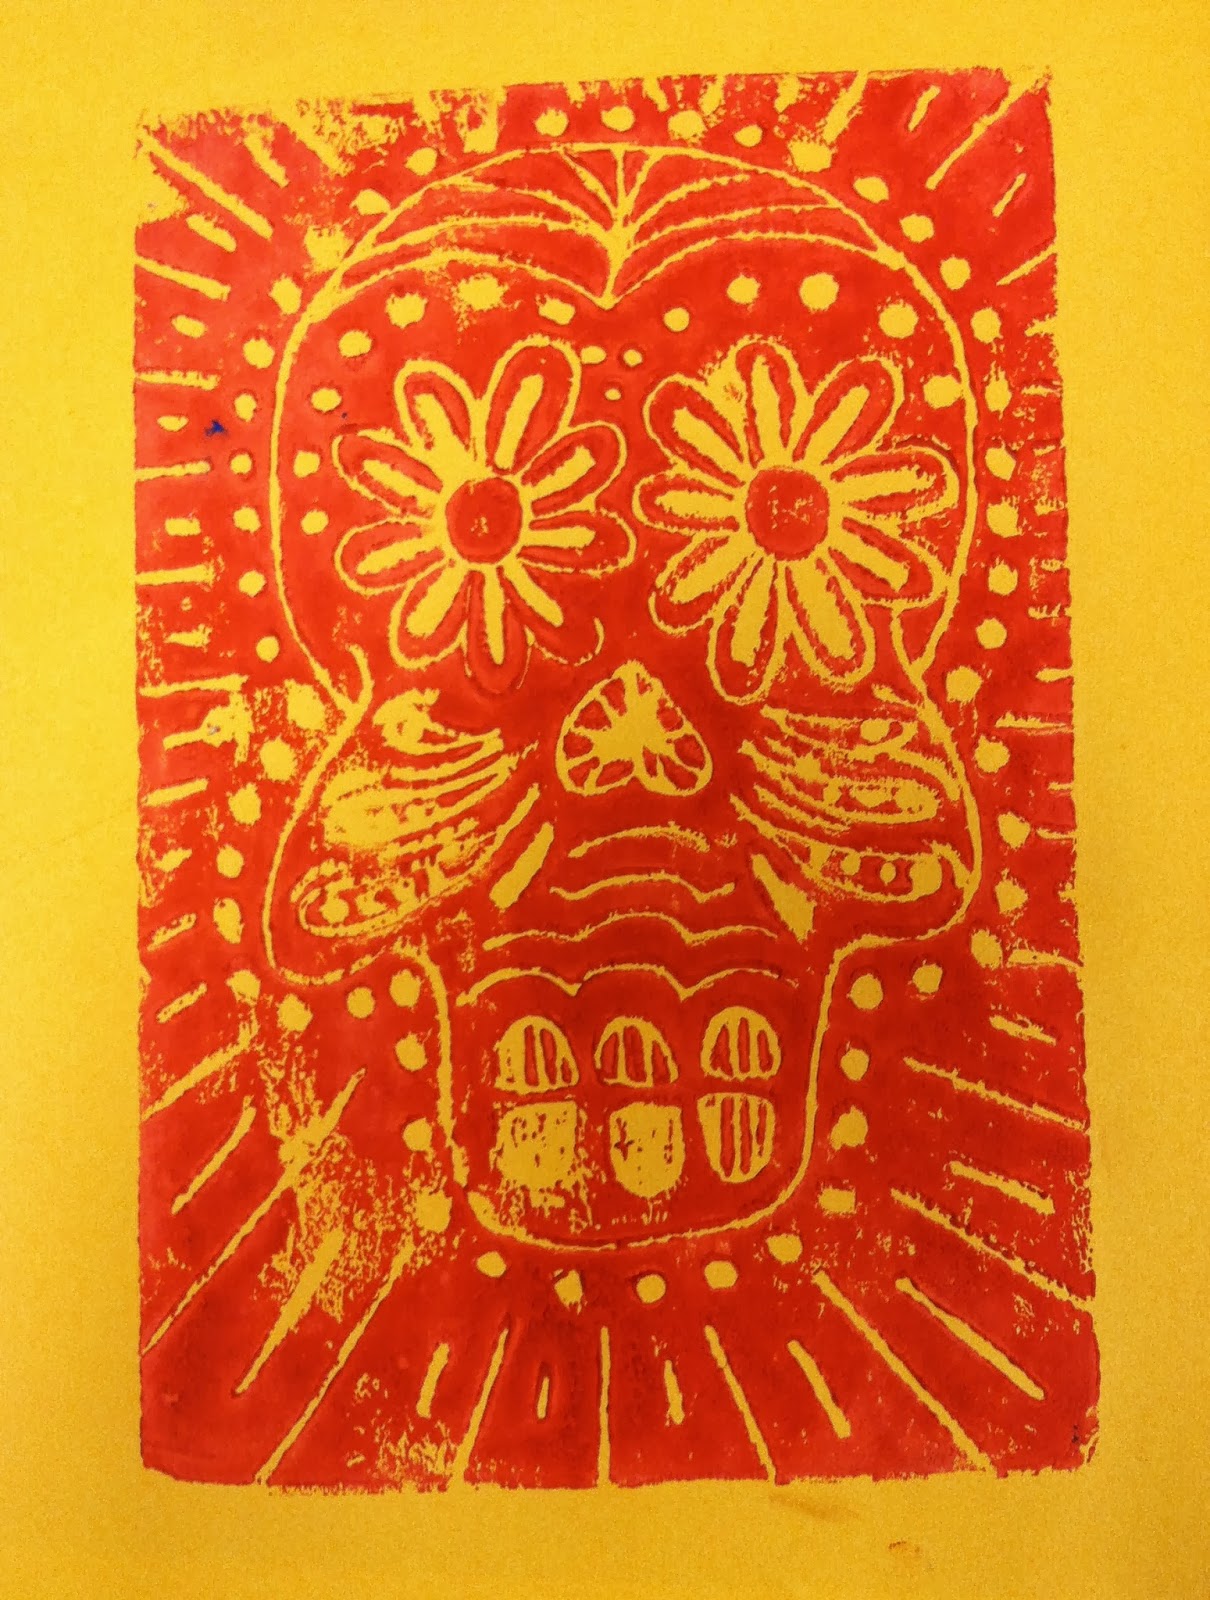 Finished a papel picado inspired linocut block for a print